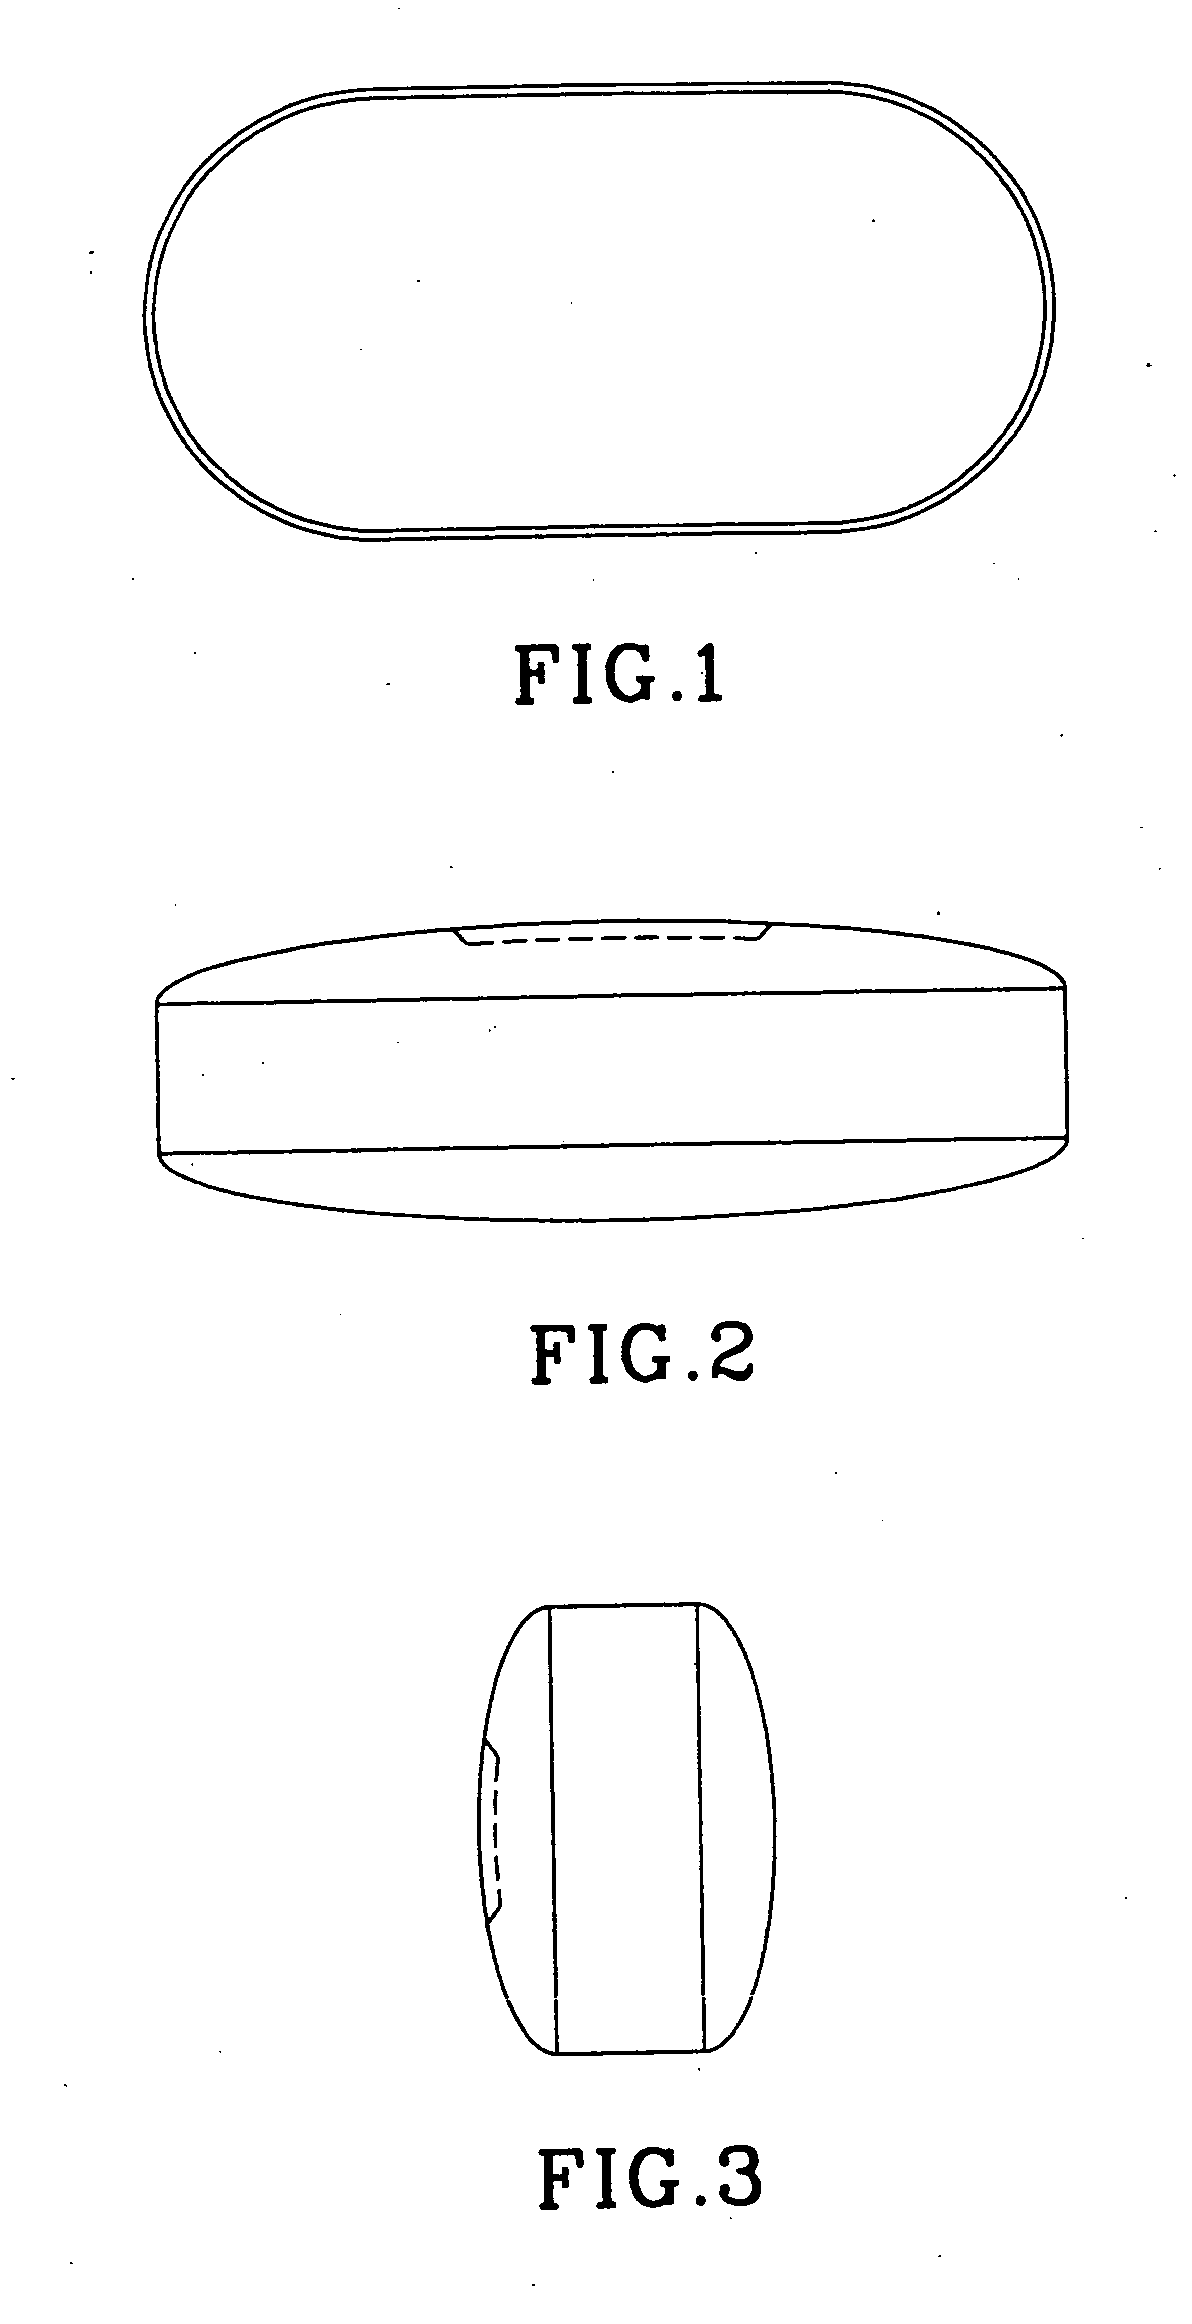 Film coated tablet for improved upper gastrointestinal tract safety